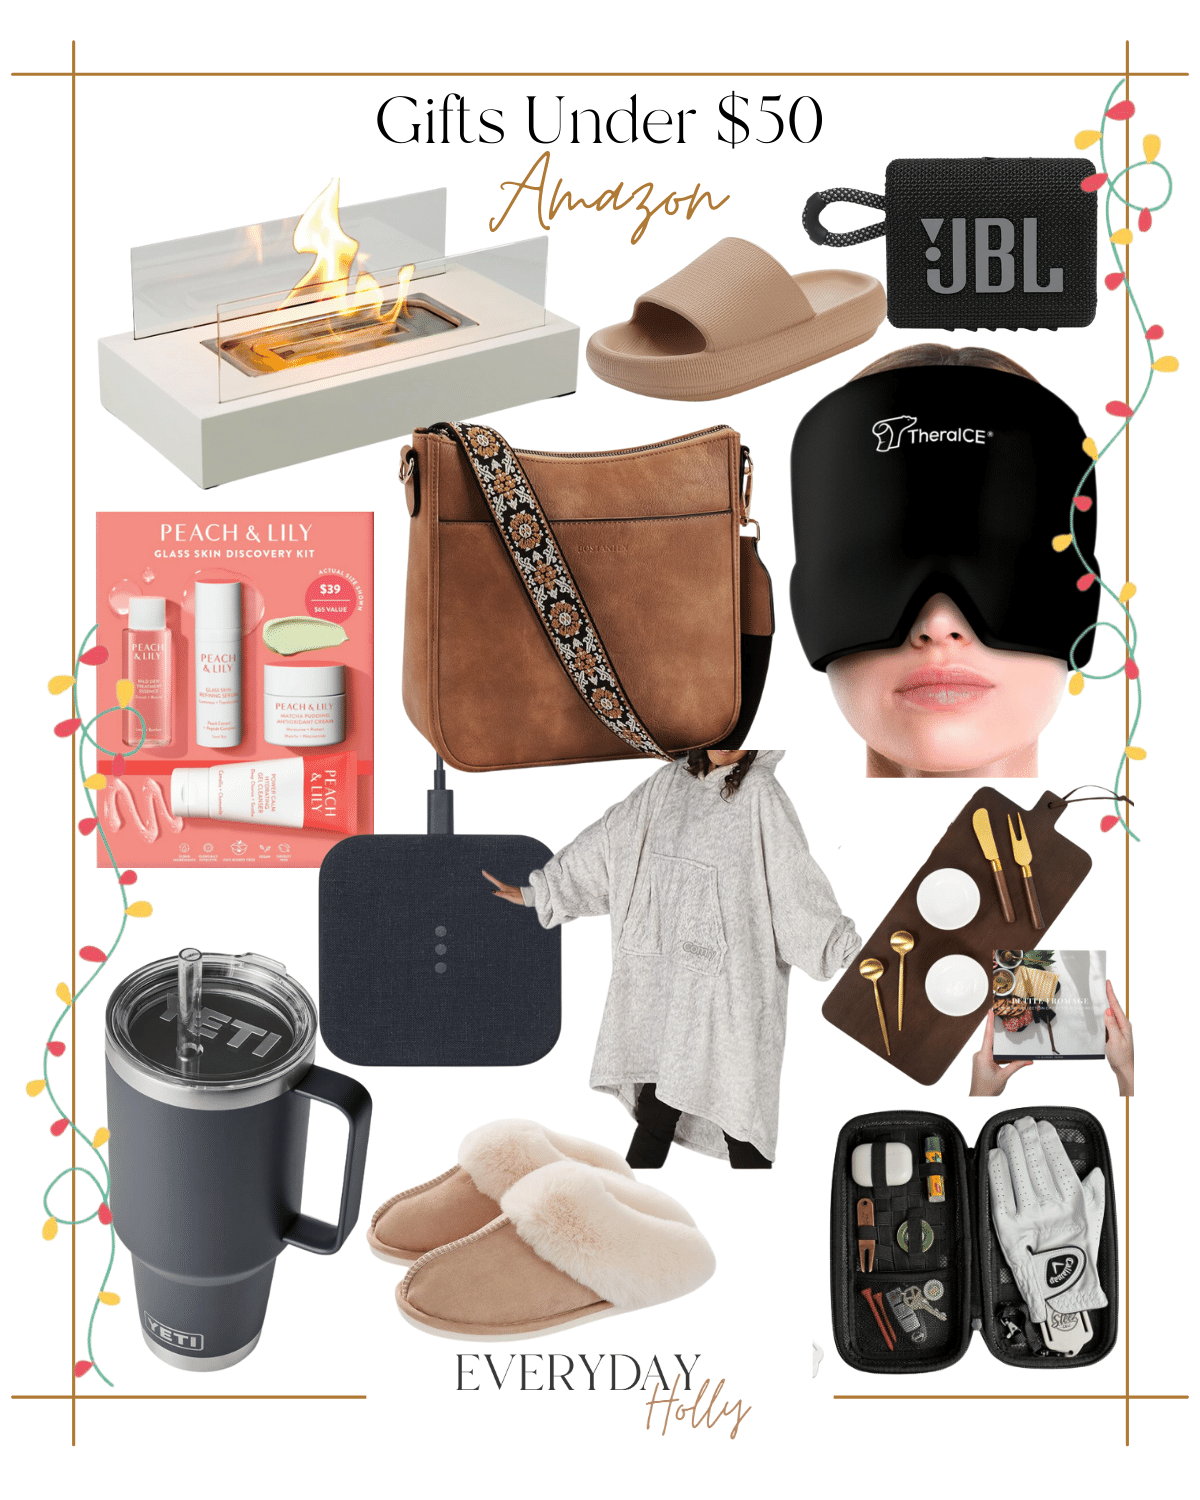 99 last minute gifts under $99 | #last #minute #gifts #giftideas #giftsunder99 #under99#giftsunder50 #firepit #slippers #speaker #headache #beauty #cheeseboard #marble #wood #charger #tumbler